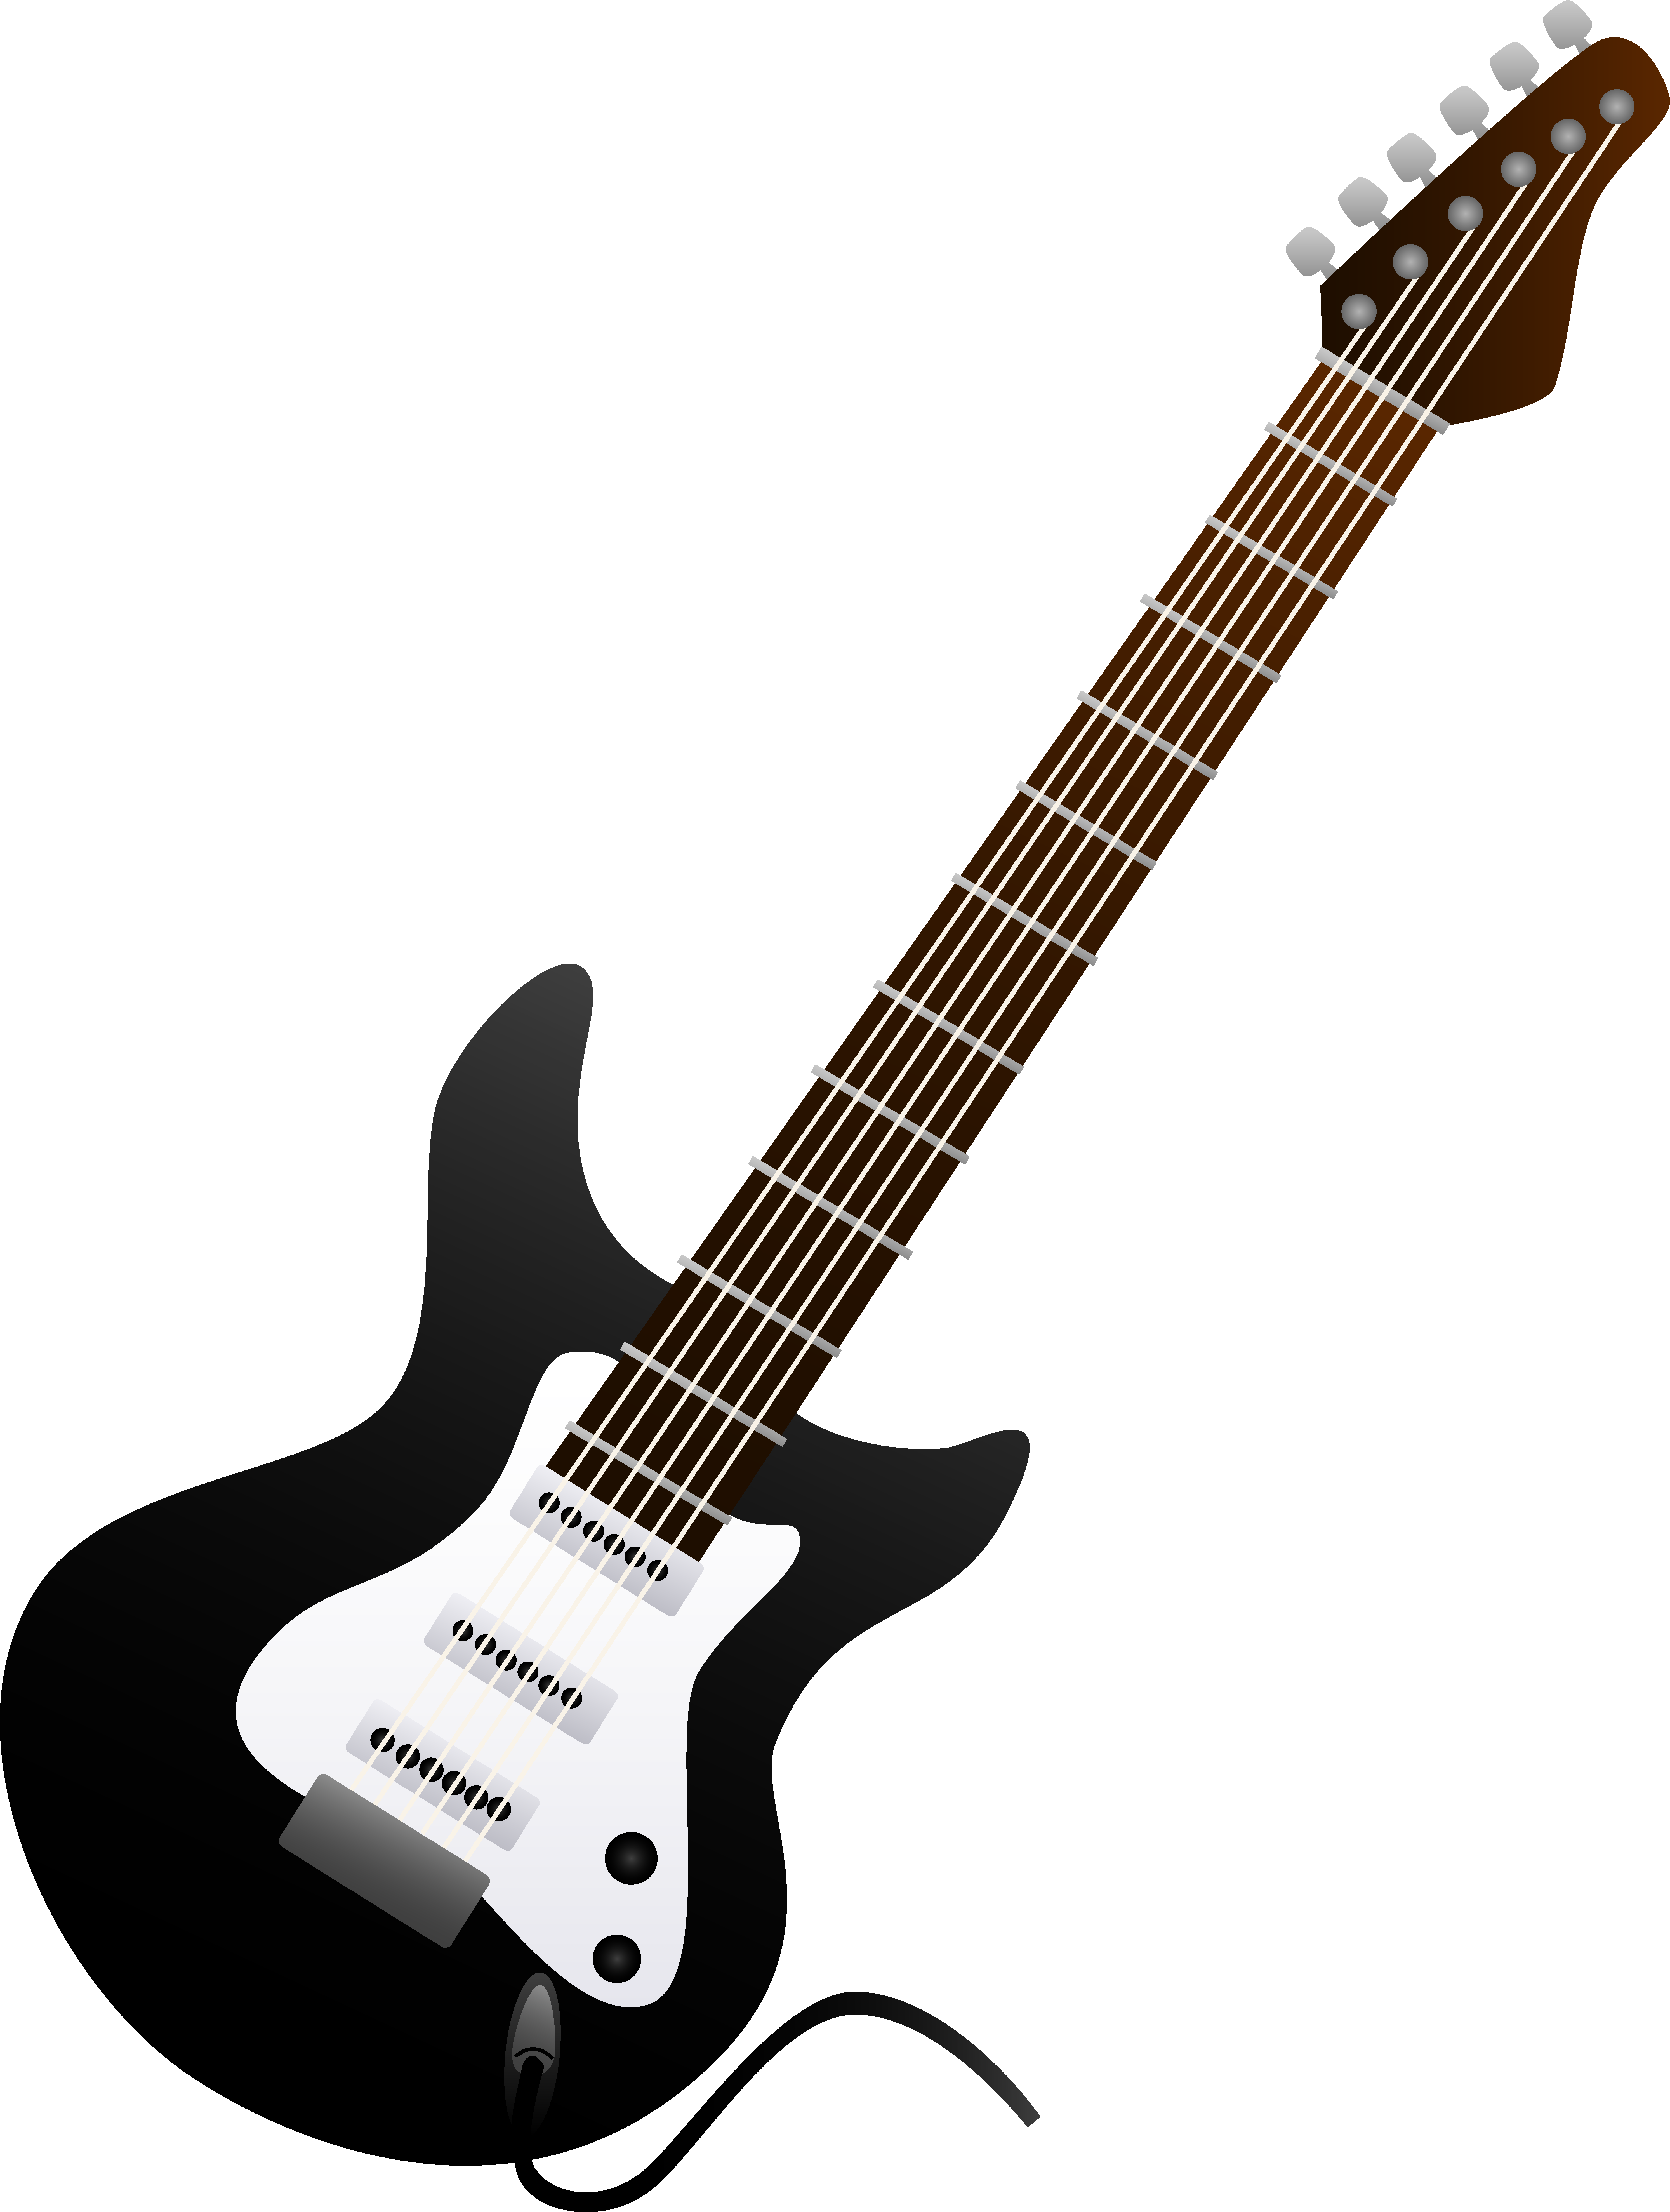 guitar clipart black and whit - Electric Guitar Clipart